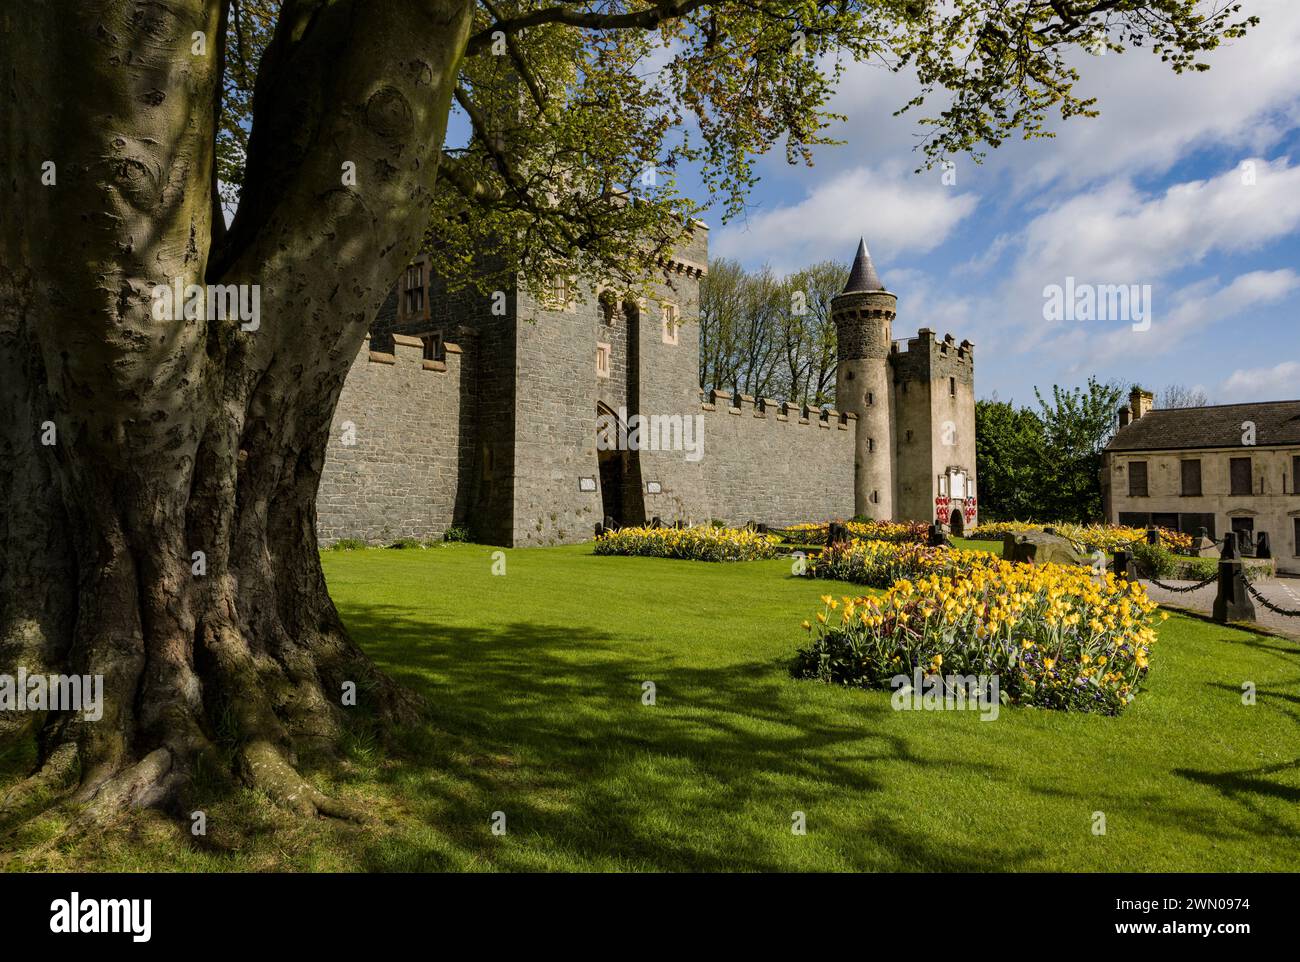 Killyleagh Castle in County Down, Northern Ireland,  is believed to be the oldest inhabited castle in the country, dating back to the 12th century. Stock Photo